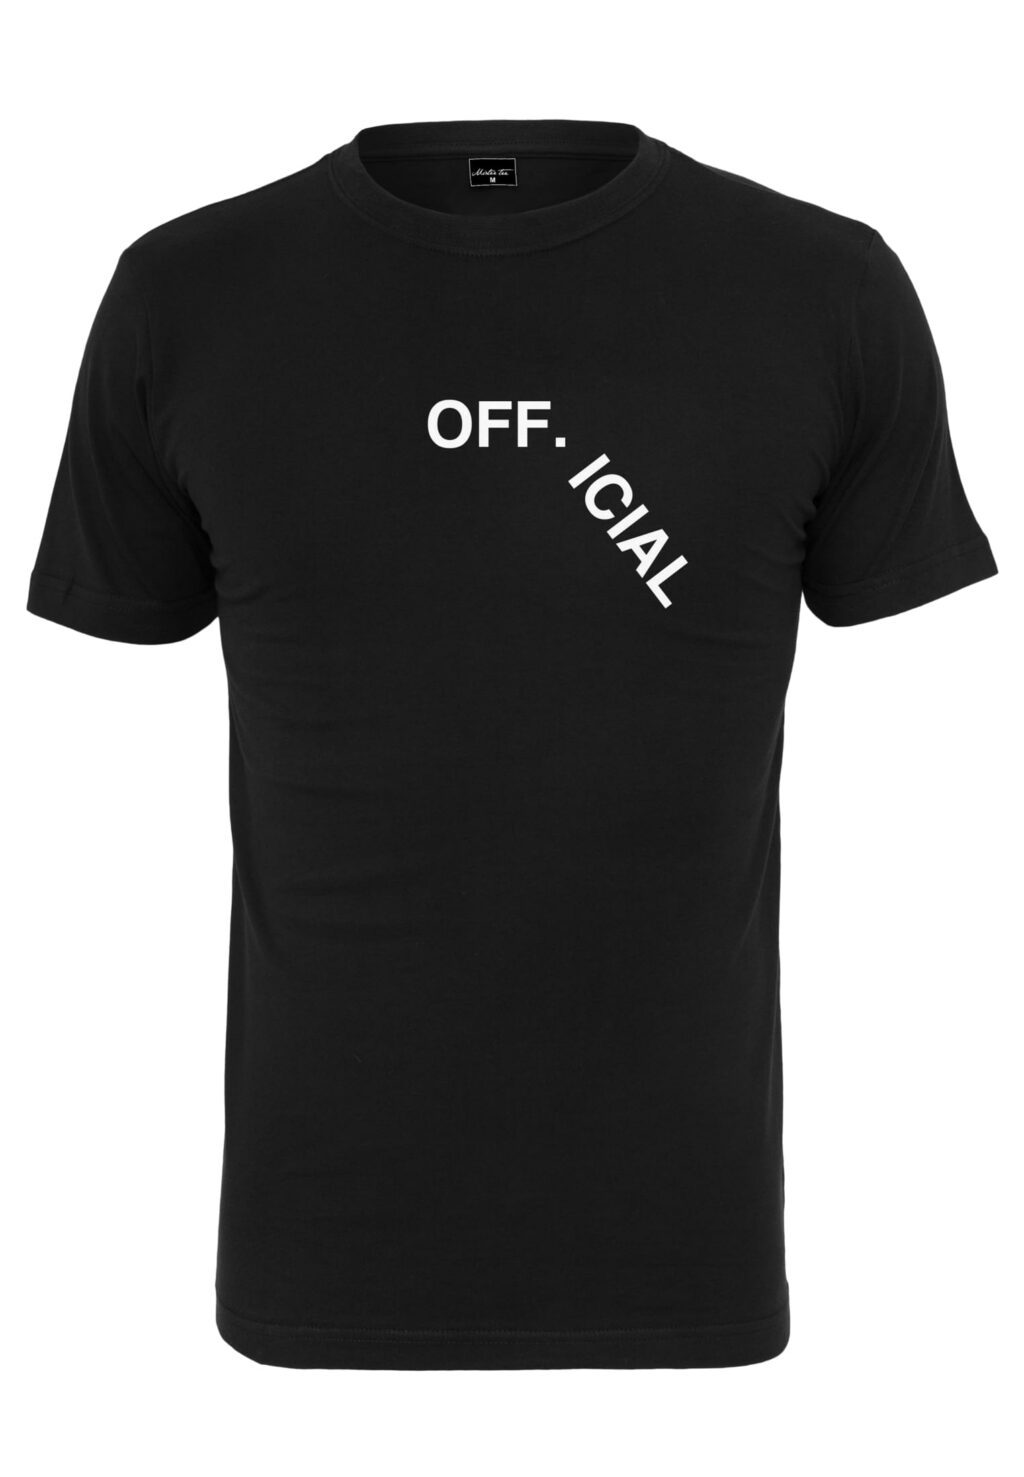 Official Tee black MT2433